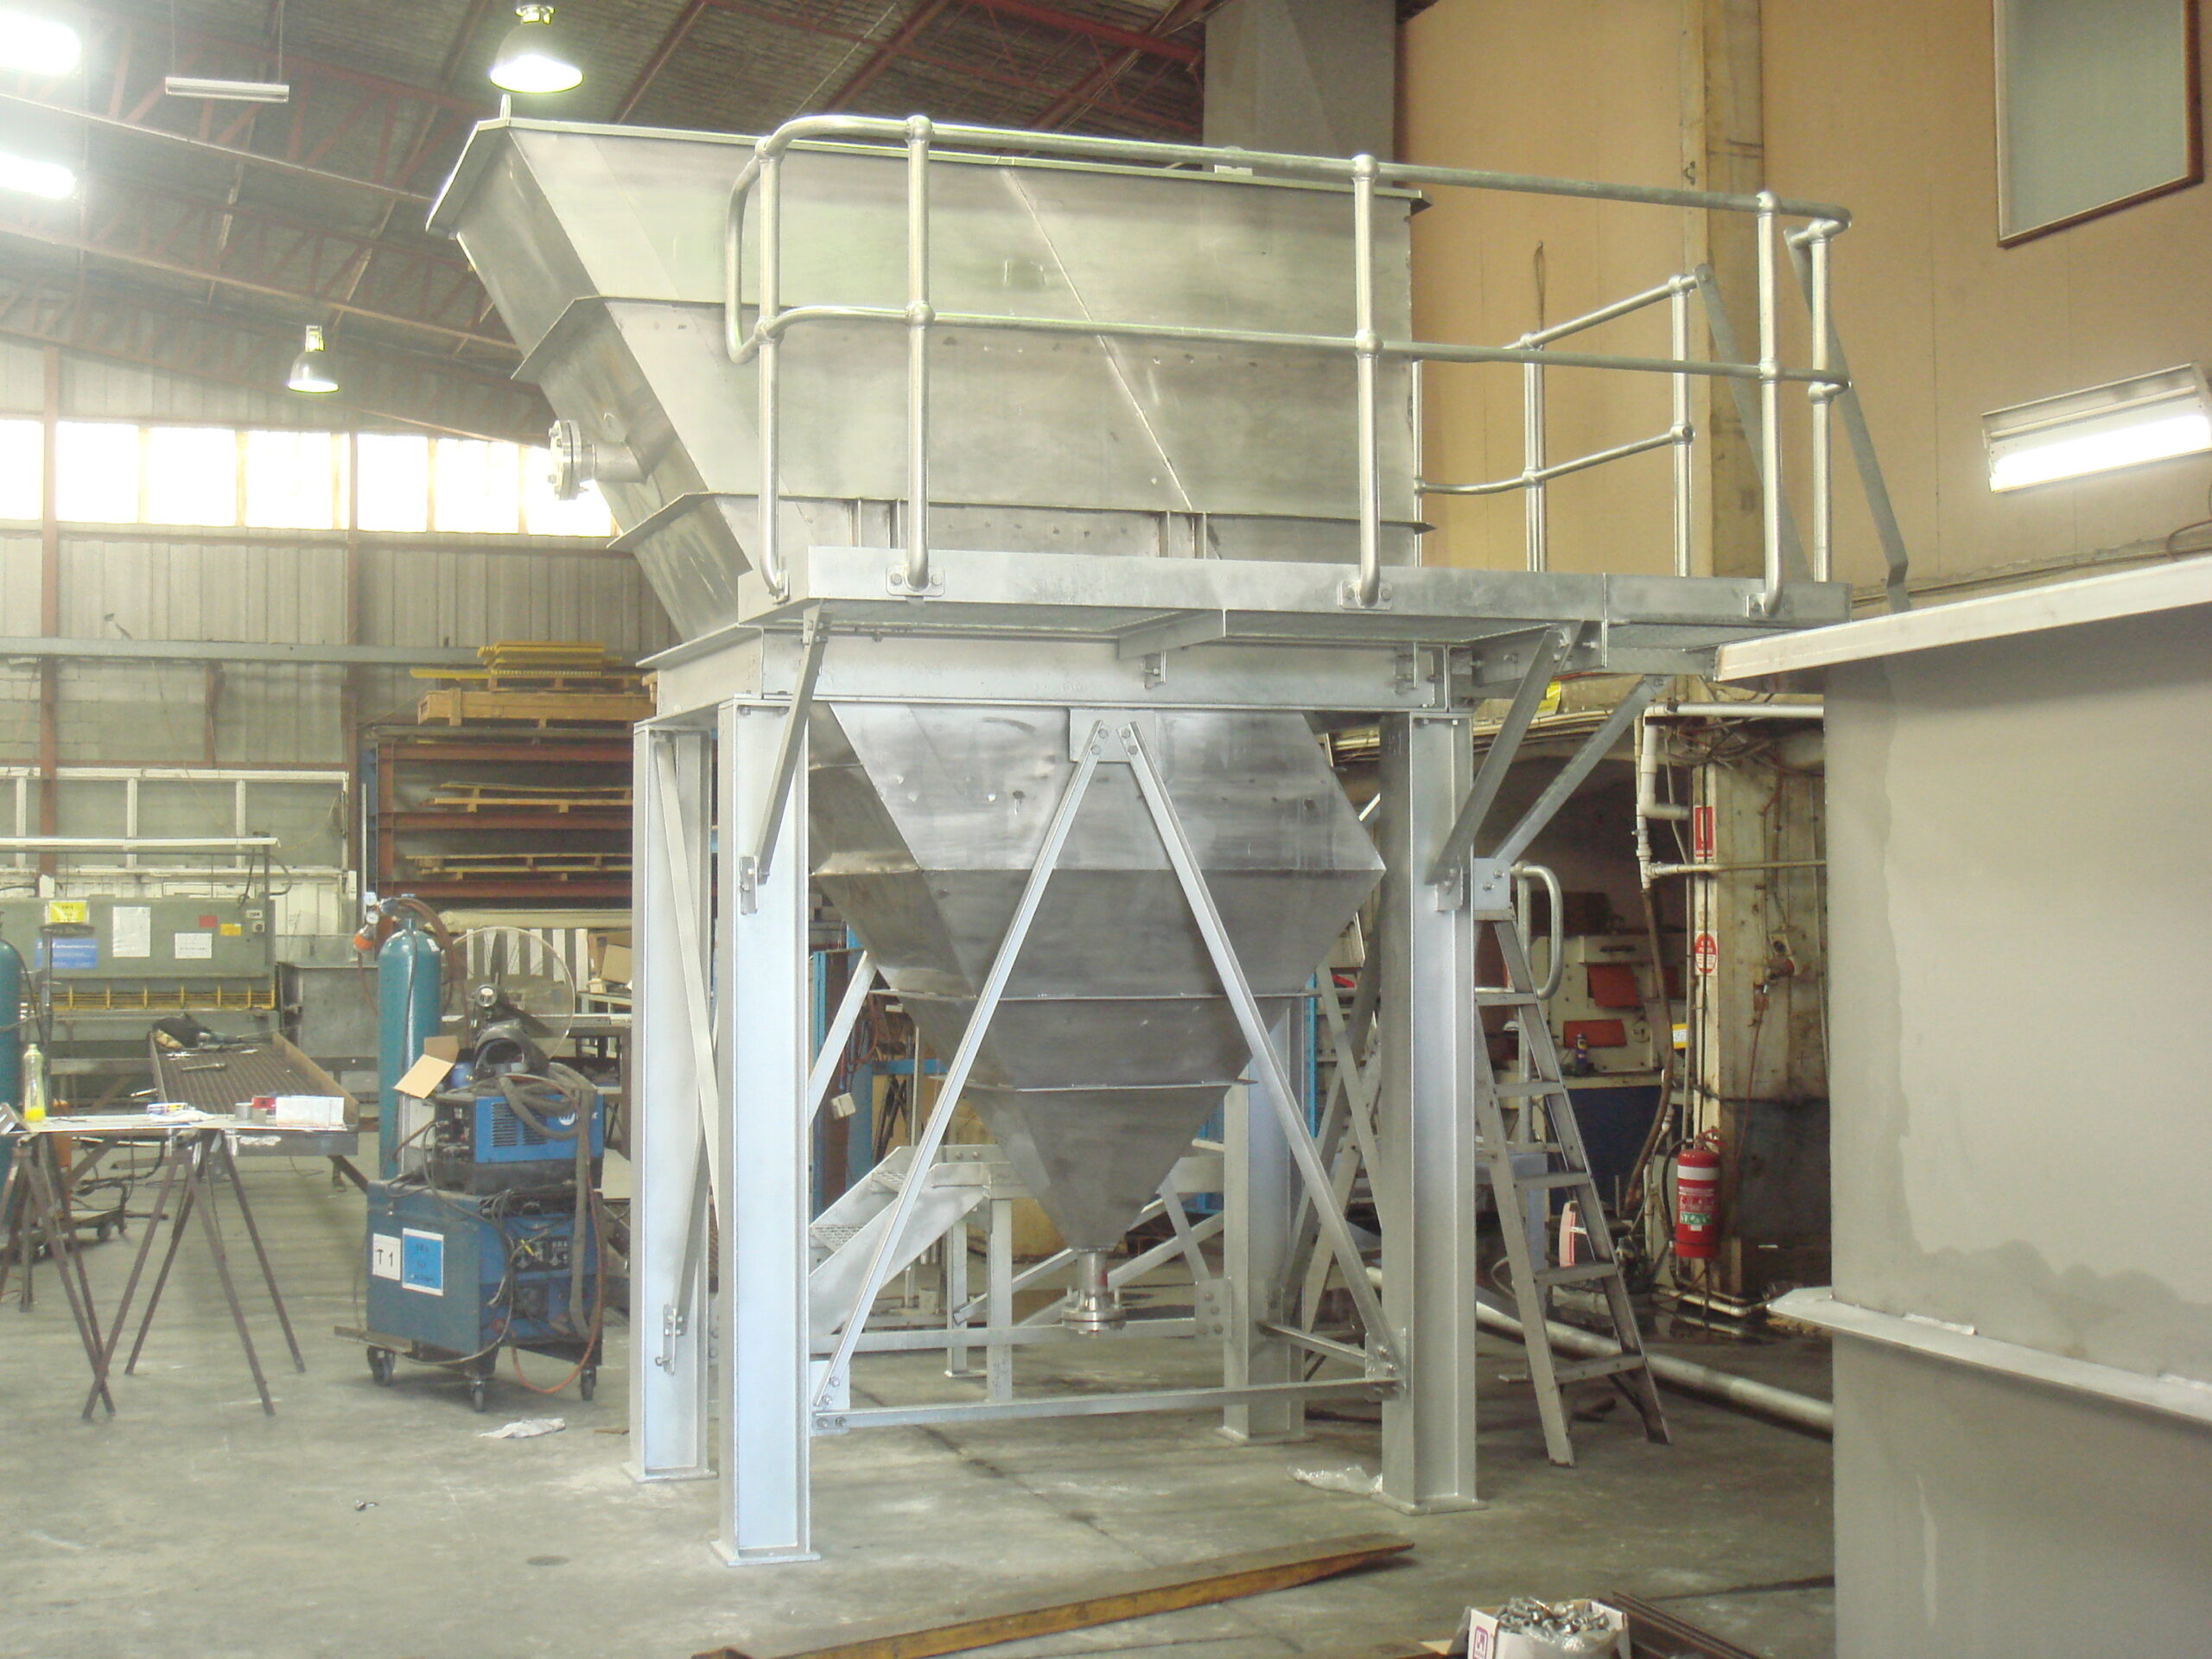 SWA Water’s Lamella Solid Separators are Setting New Standards in the Mining Industry